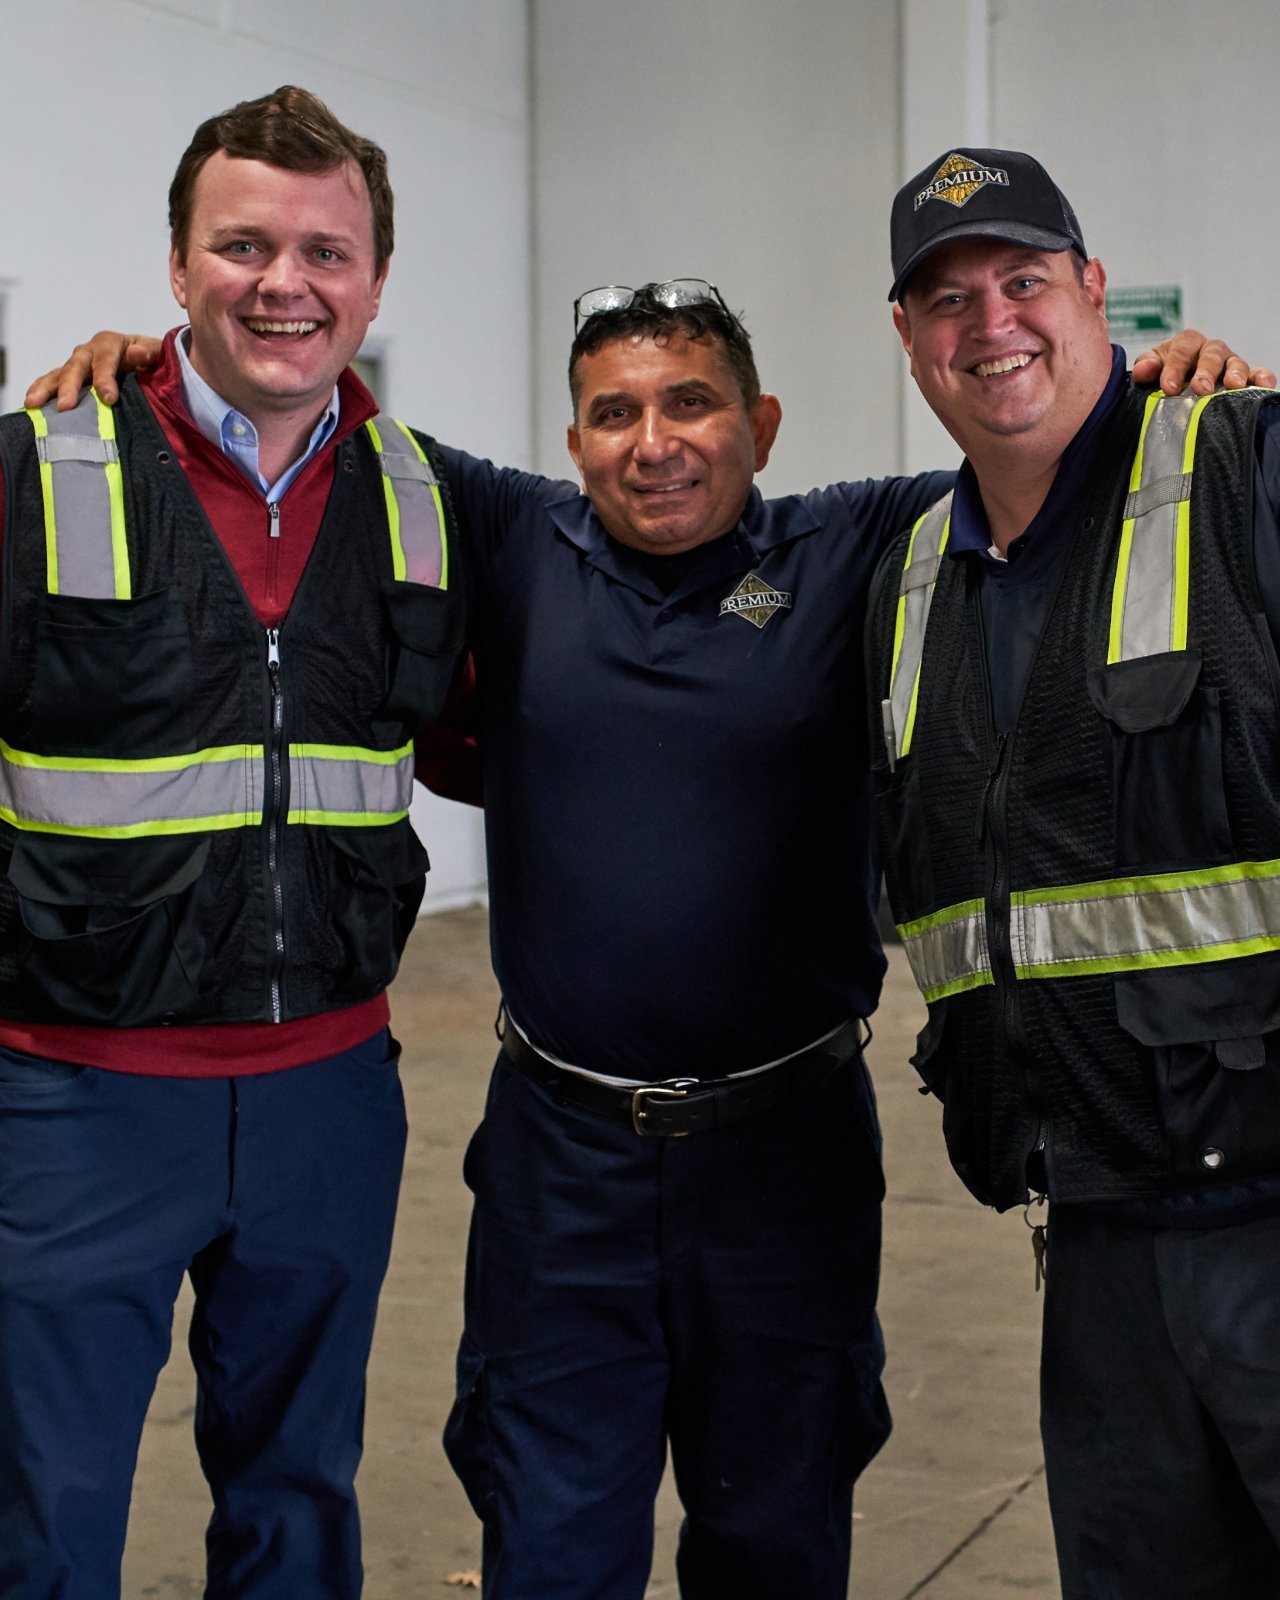 Three men with reflective safety vests standing together for a photo